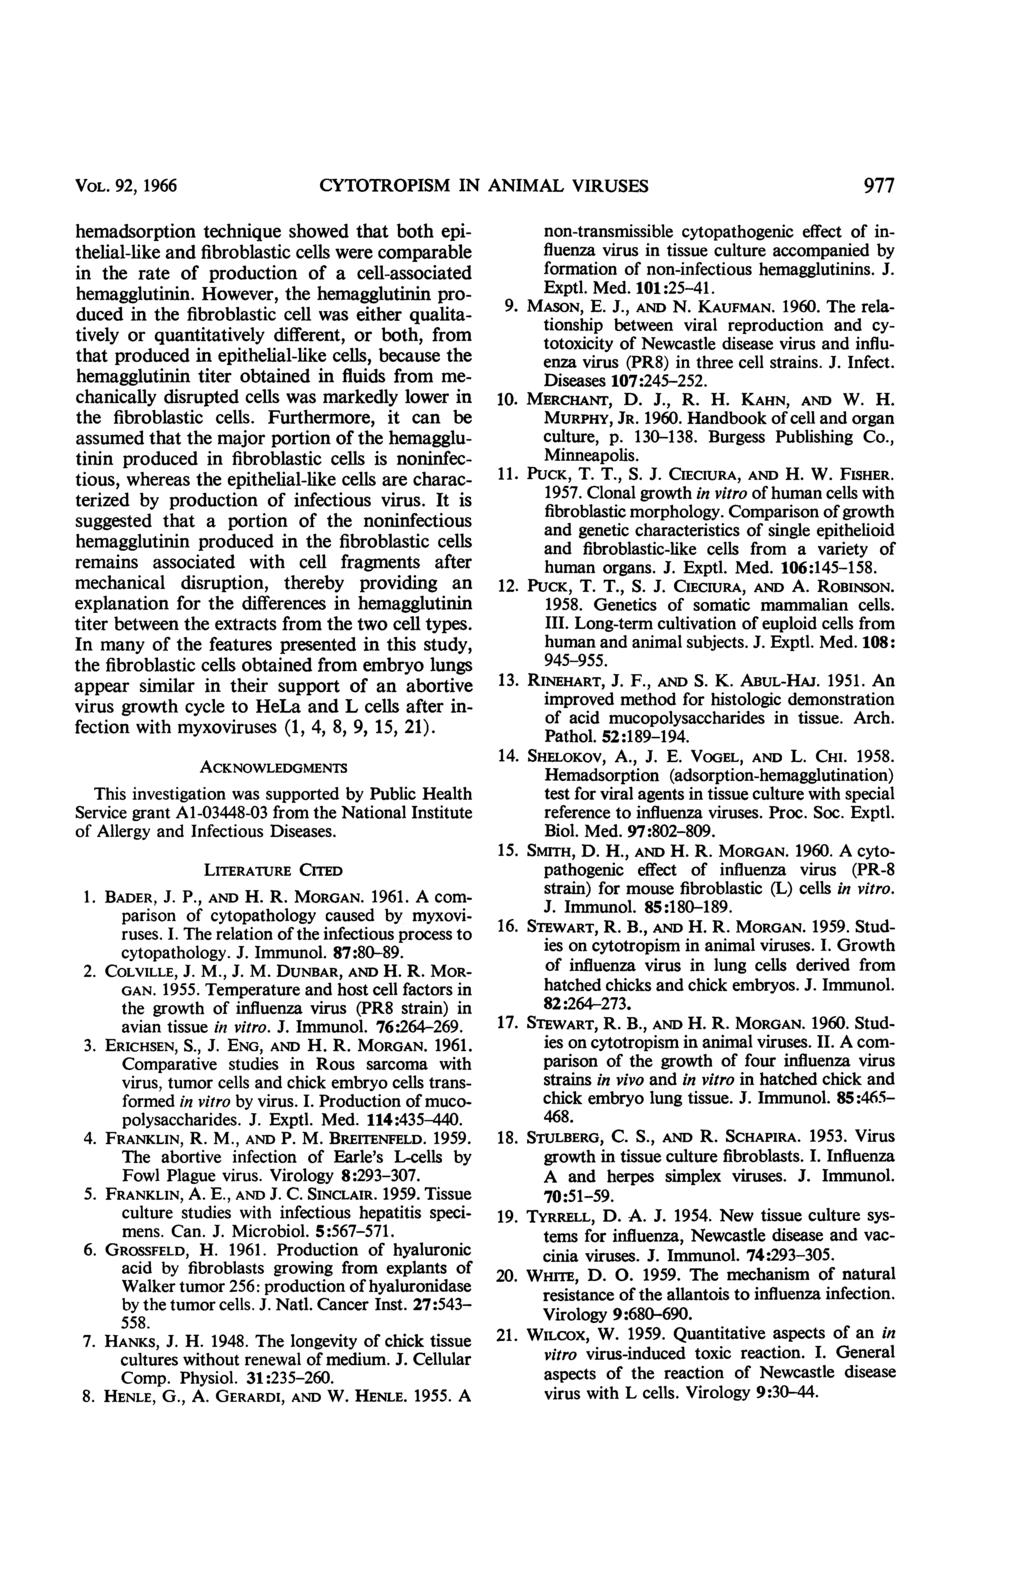 VOL. 92, 1966 CYTOTROPISM IN ANIMAL VIRUSES 977 hemadsorption technique showed that both epithelial-like and fibroblastic cells were comparable in the rate of production of a cell-associated